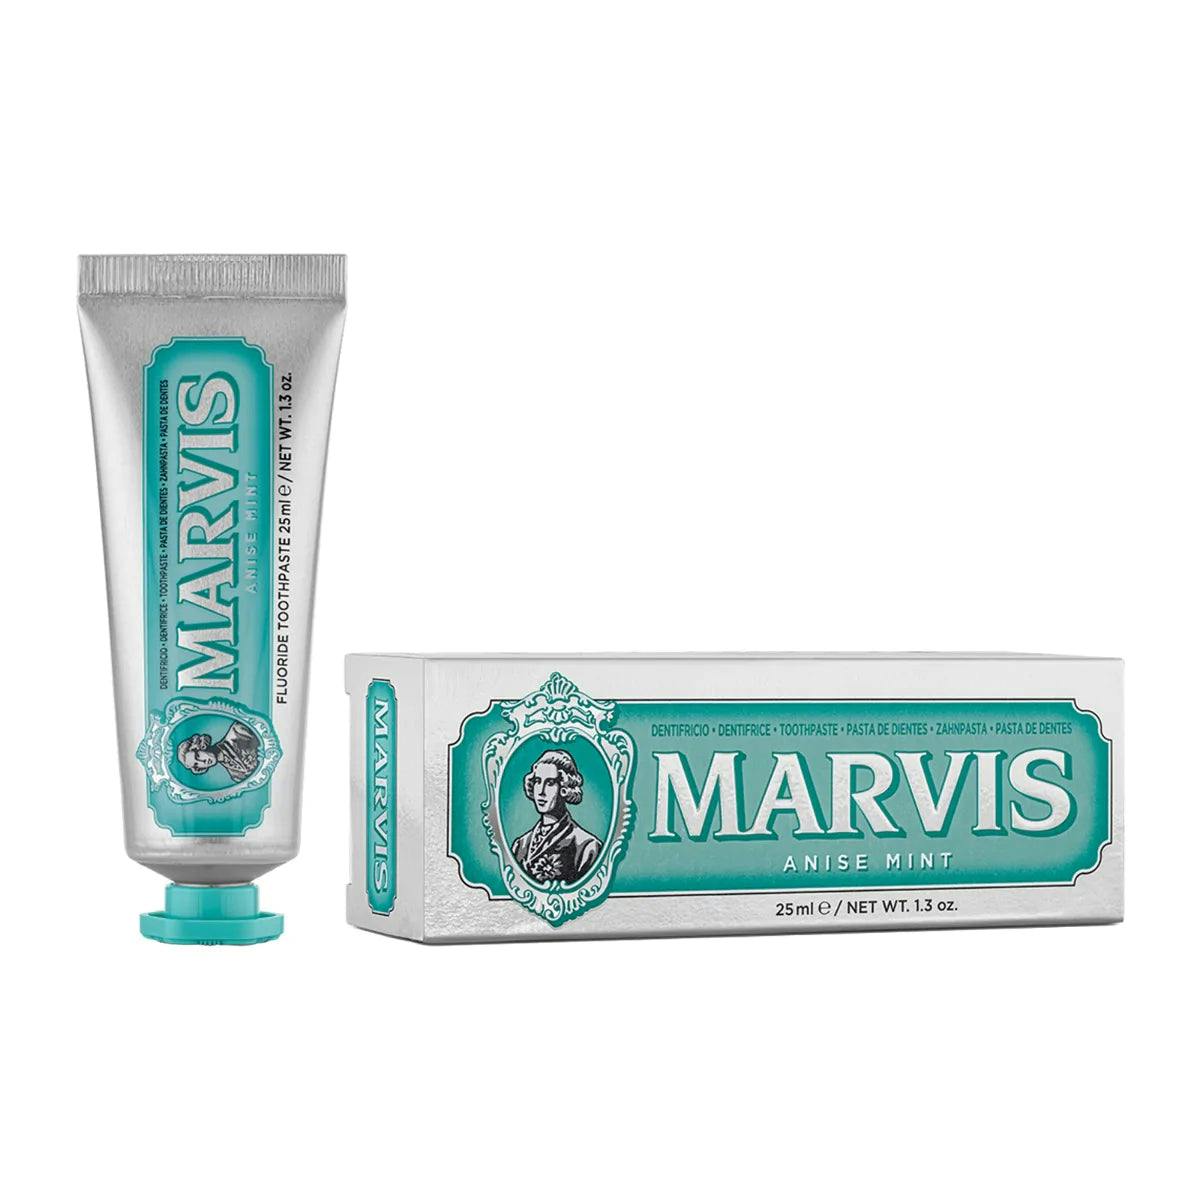 Marvis Travel Size Anise Mint Toothpaste 25ml